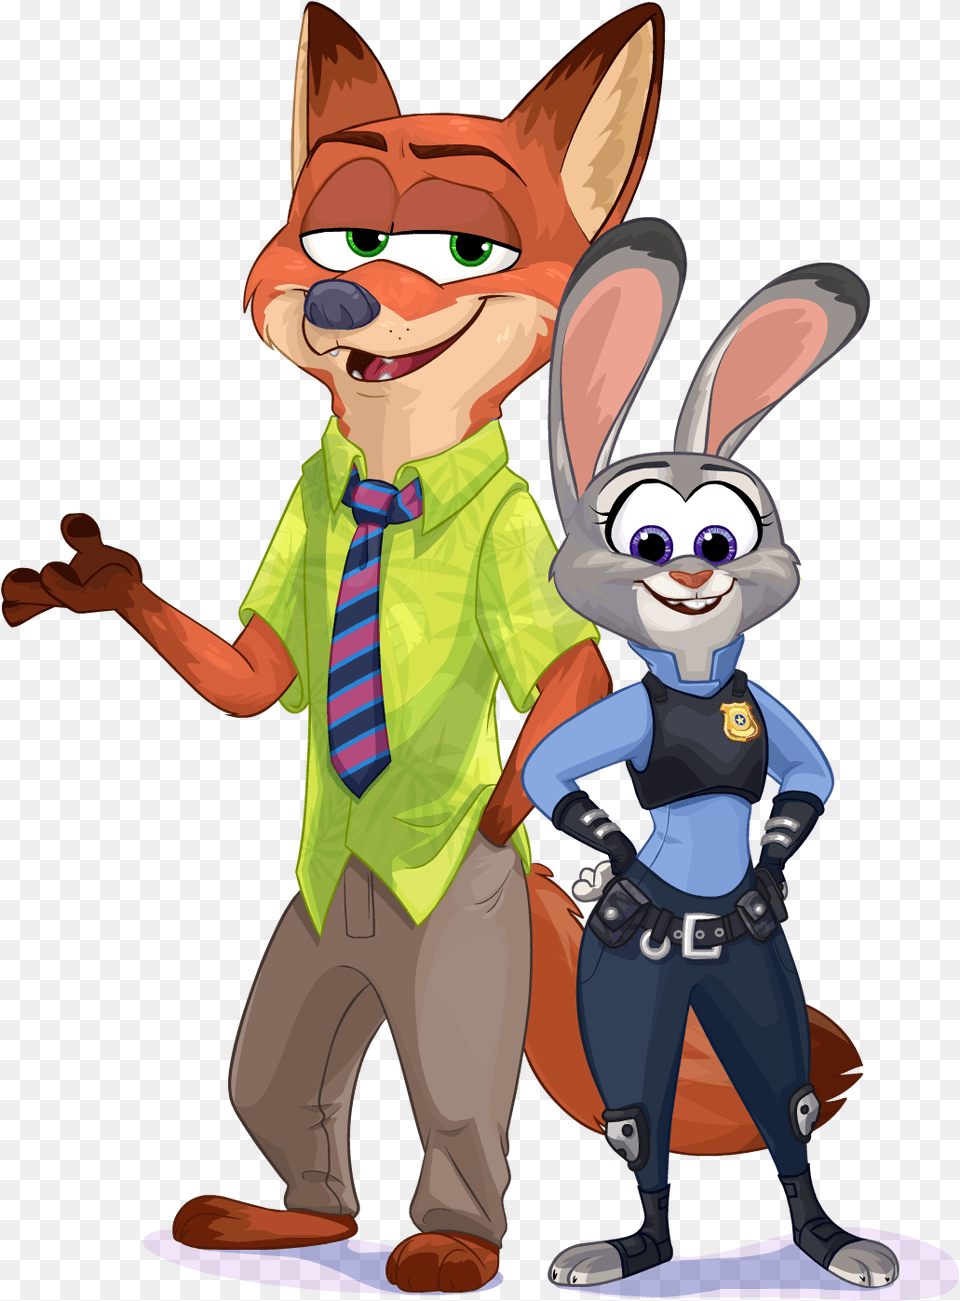 Newspaper Issue 549 Nick And Judy Judy Club Penguin Nick Wilde Club Penguin, Publication, Book, Comics, Accessories Free Transparent Png